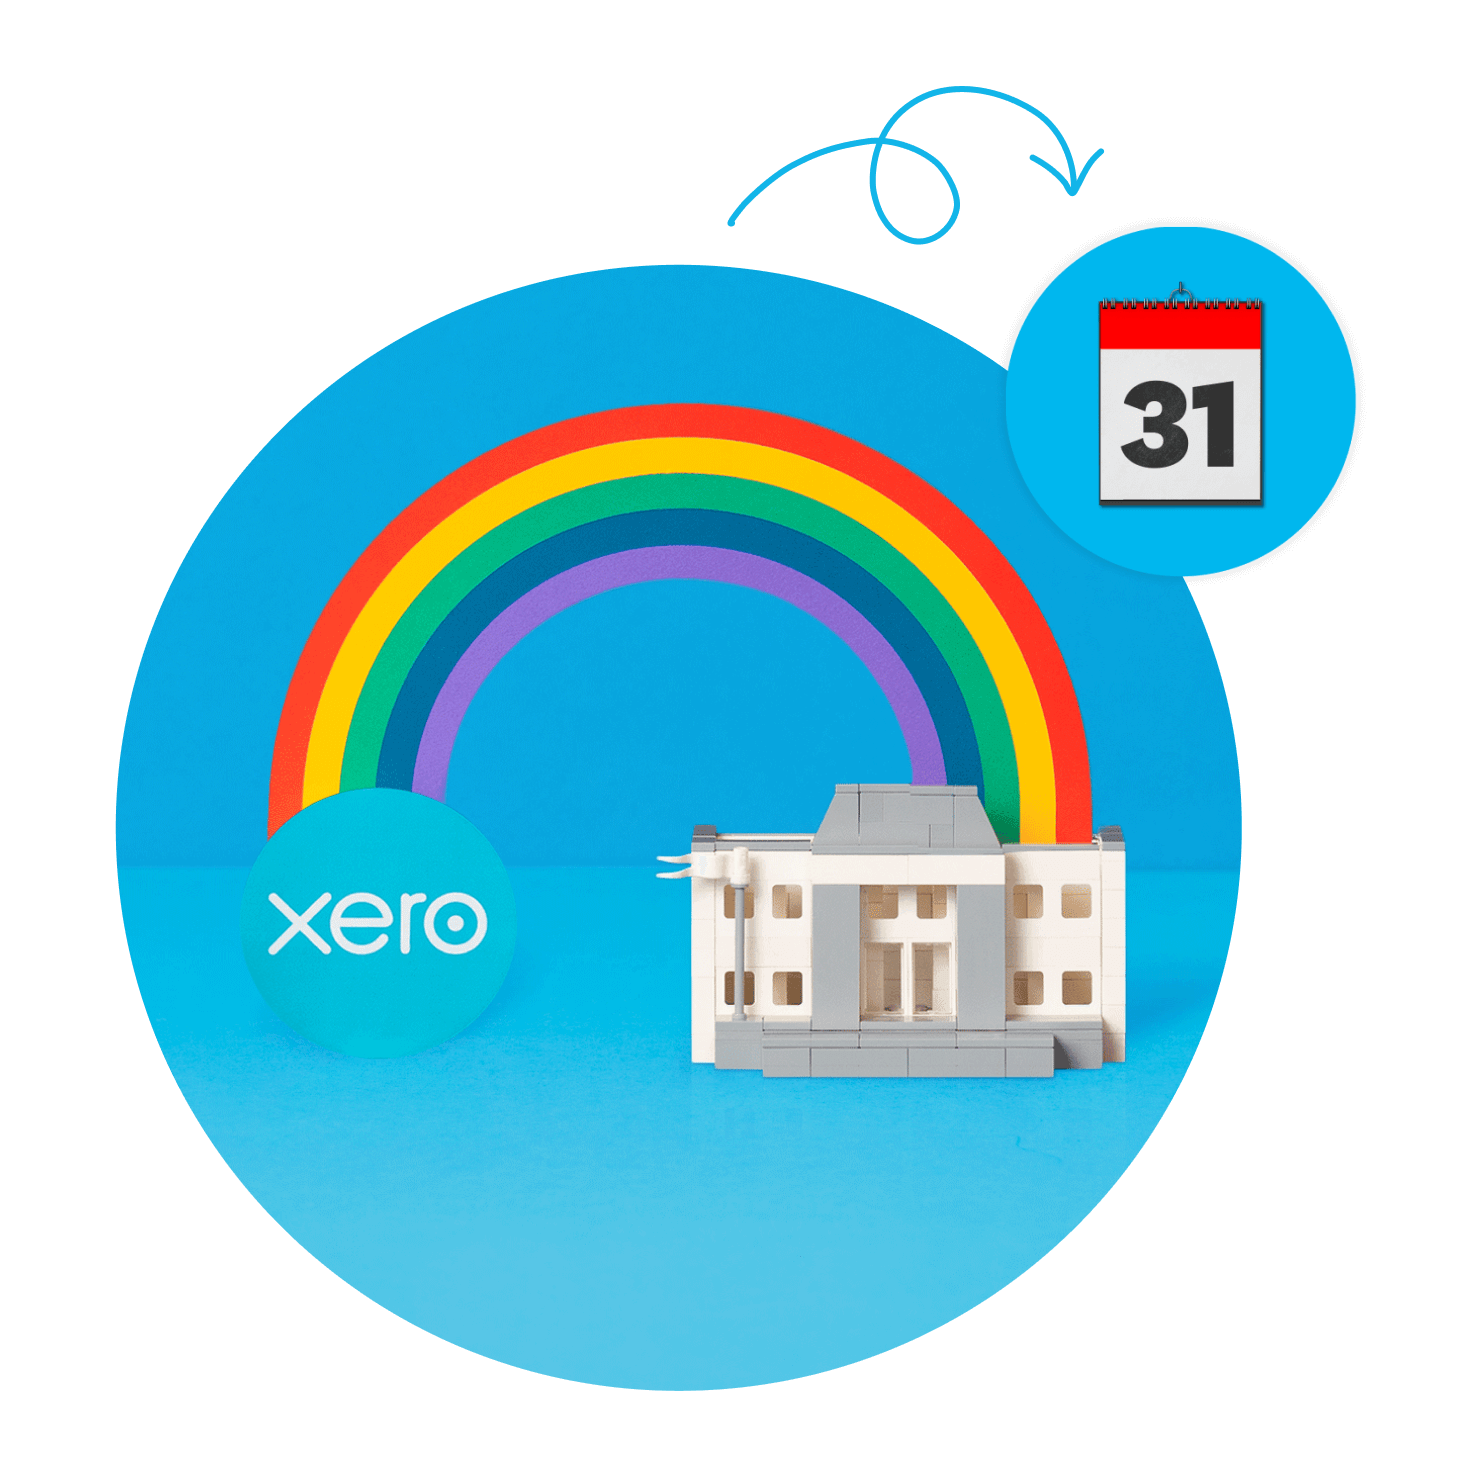 Xero has eInvoicing built in, so you’re ready to send eInvoices to NZ government agencies and business